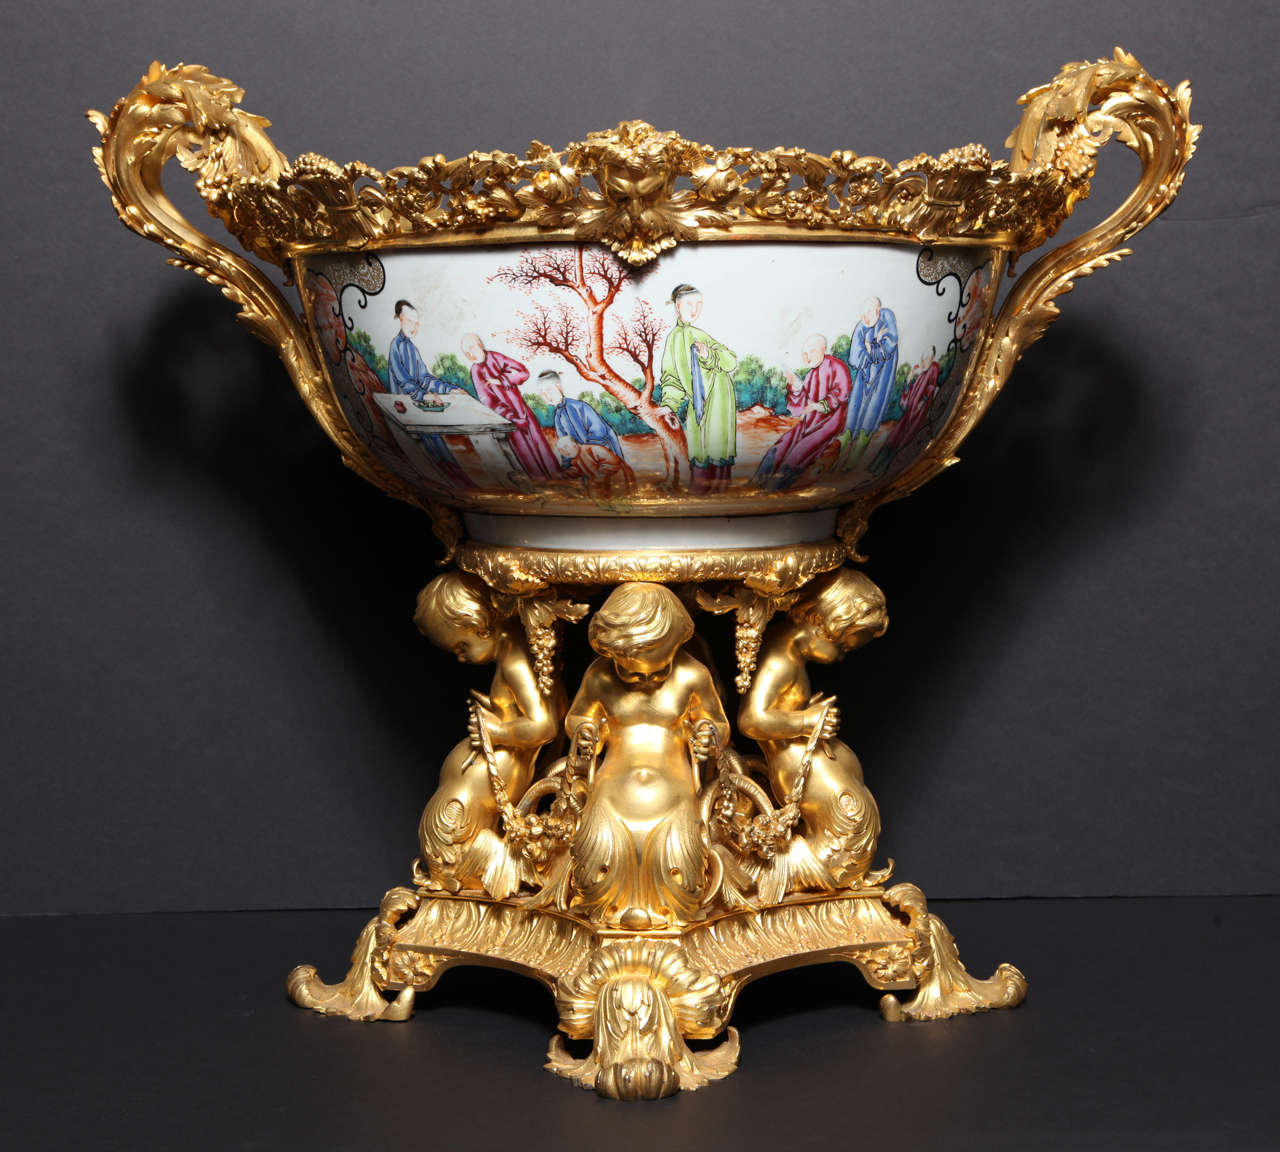 A very large and important Charles X doré bronze and Chinese Export porcelain jardinière, the exterior of the porcelain finely painted with scrolling cartouches of Scholars in a landscape flanked by birds on branches, the interior w ribbon tied